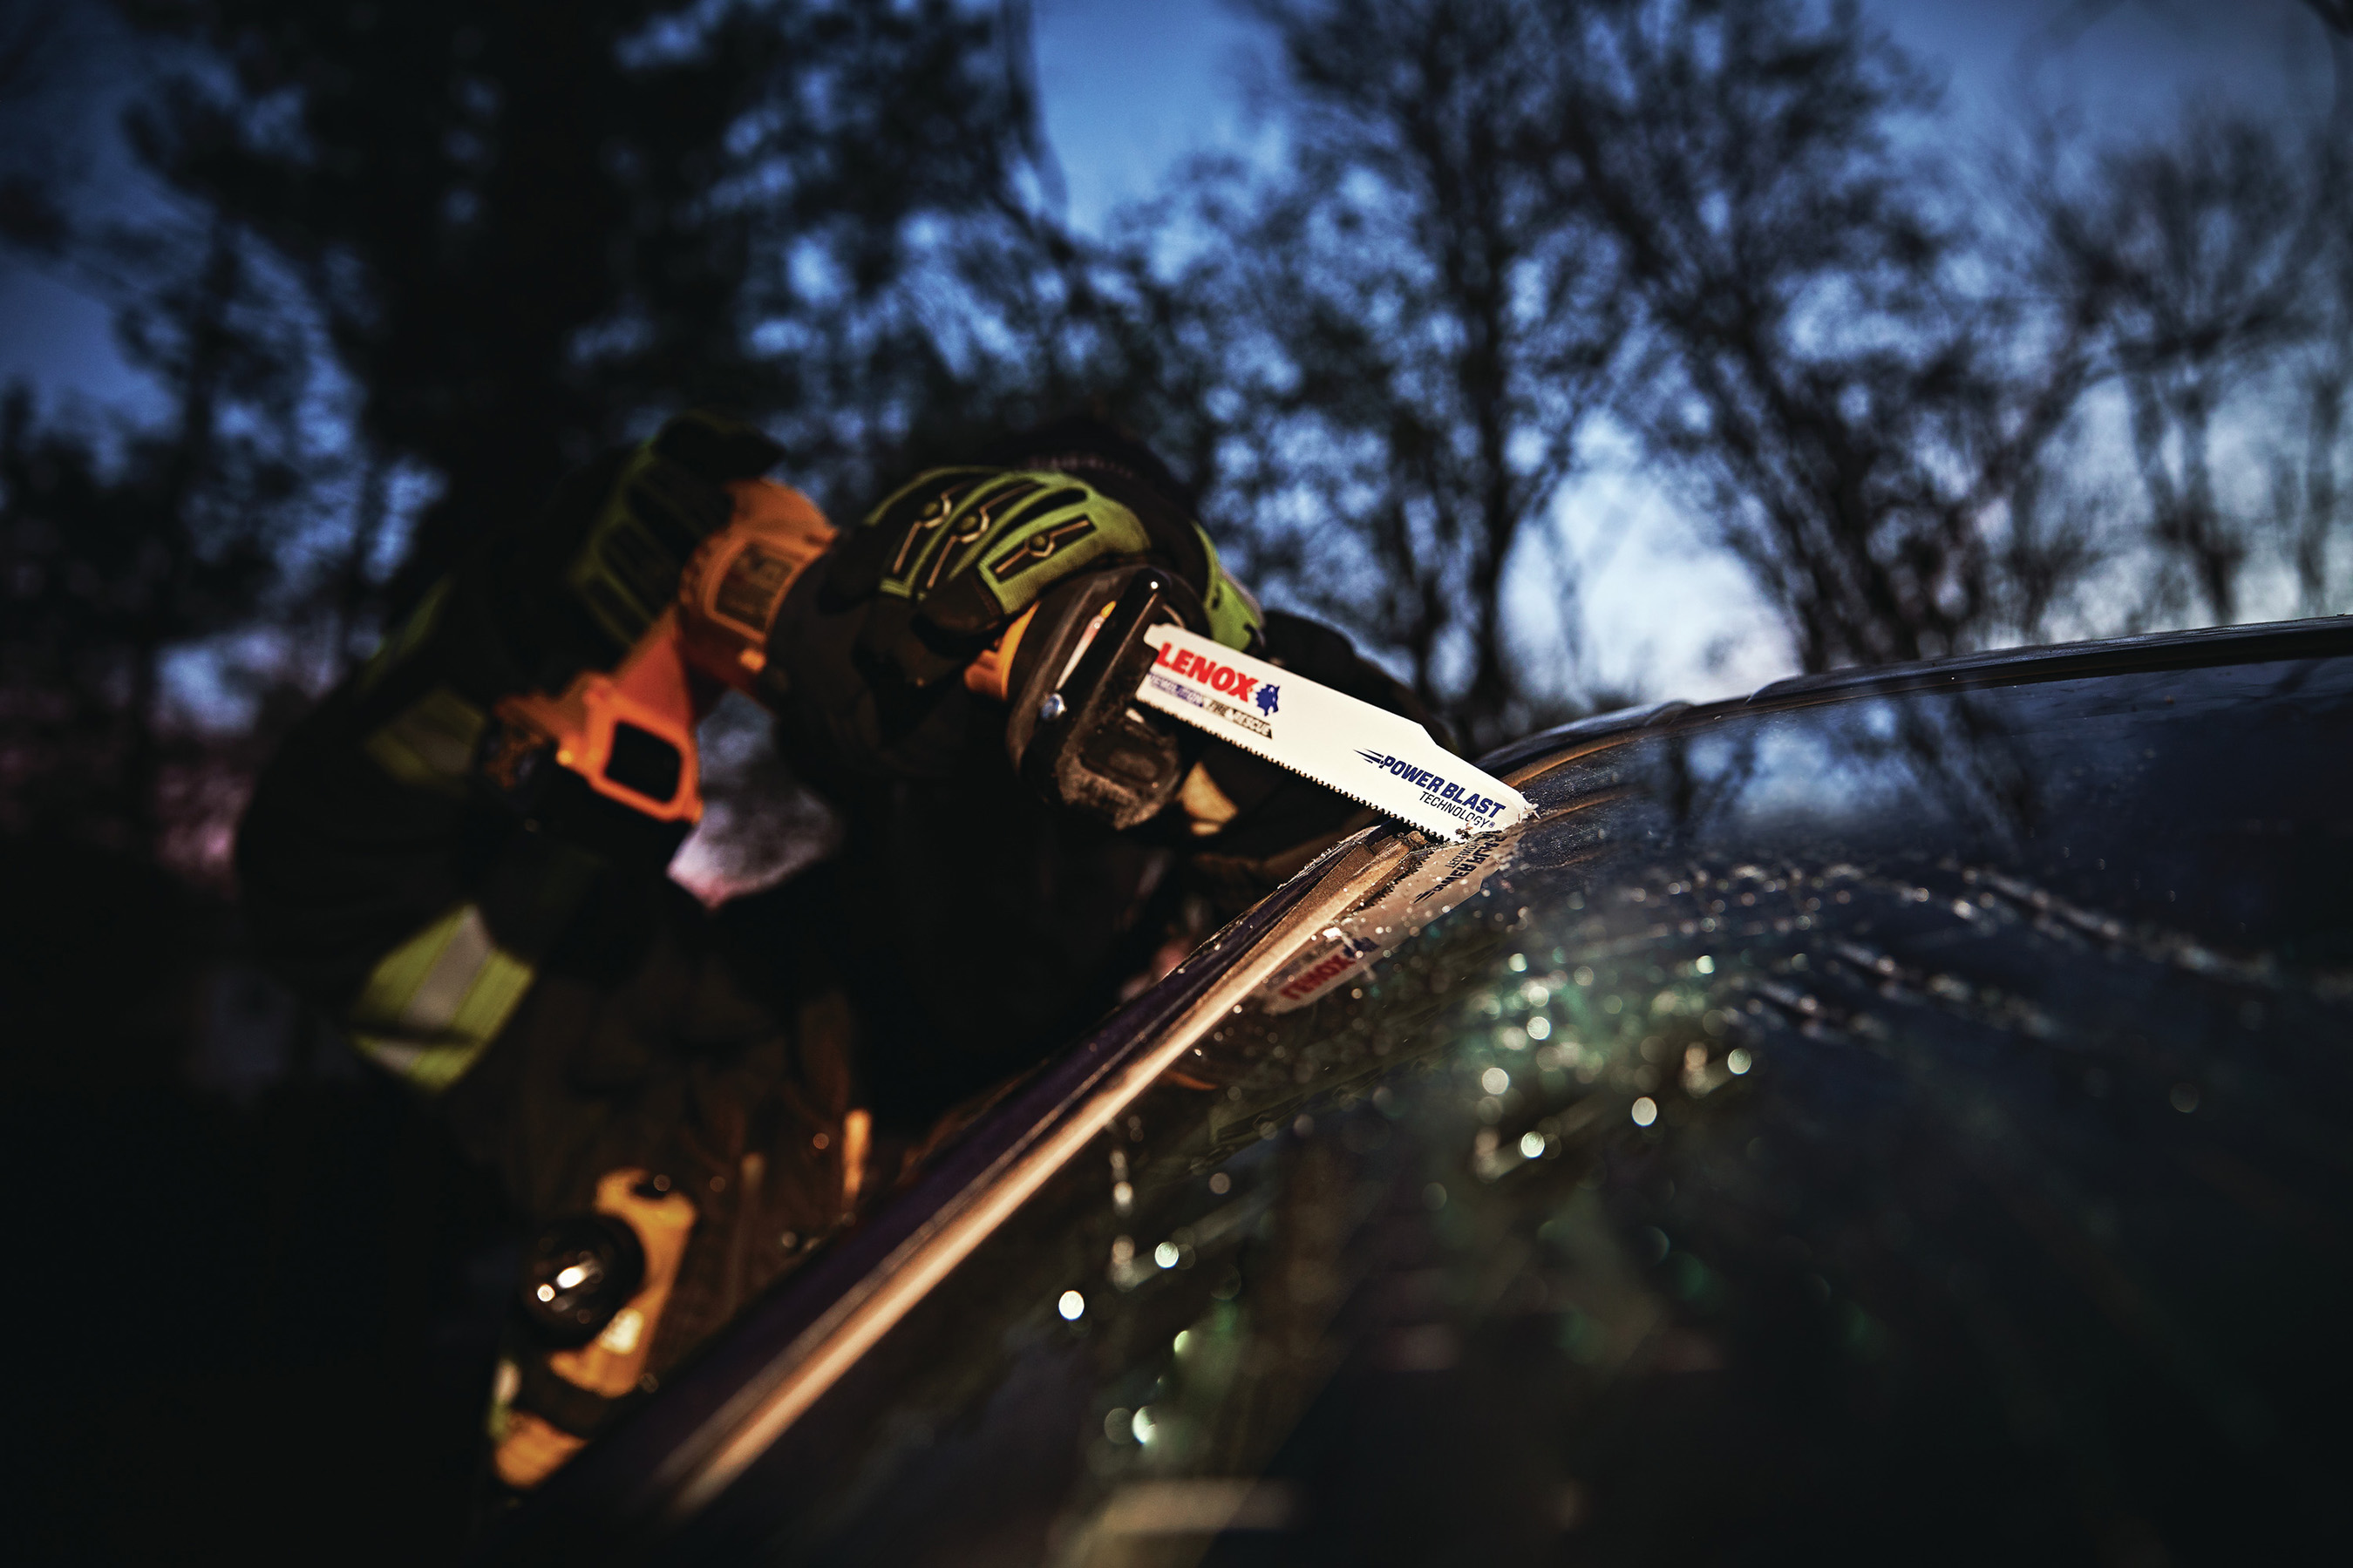 Trade professionals give themselves an edge when performance matters. First responders give themselves the same edge when lives are at stake with LENOX® fire, rescue, and demolition blades.